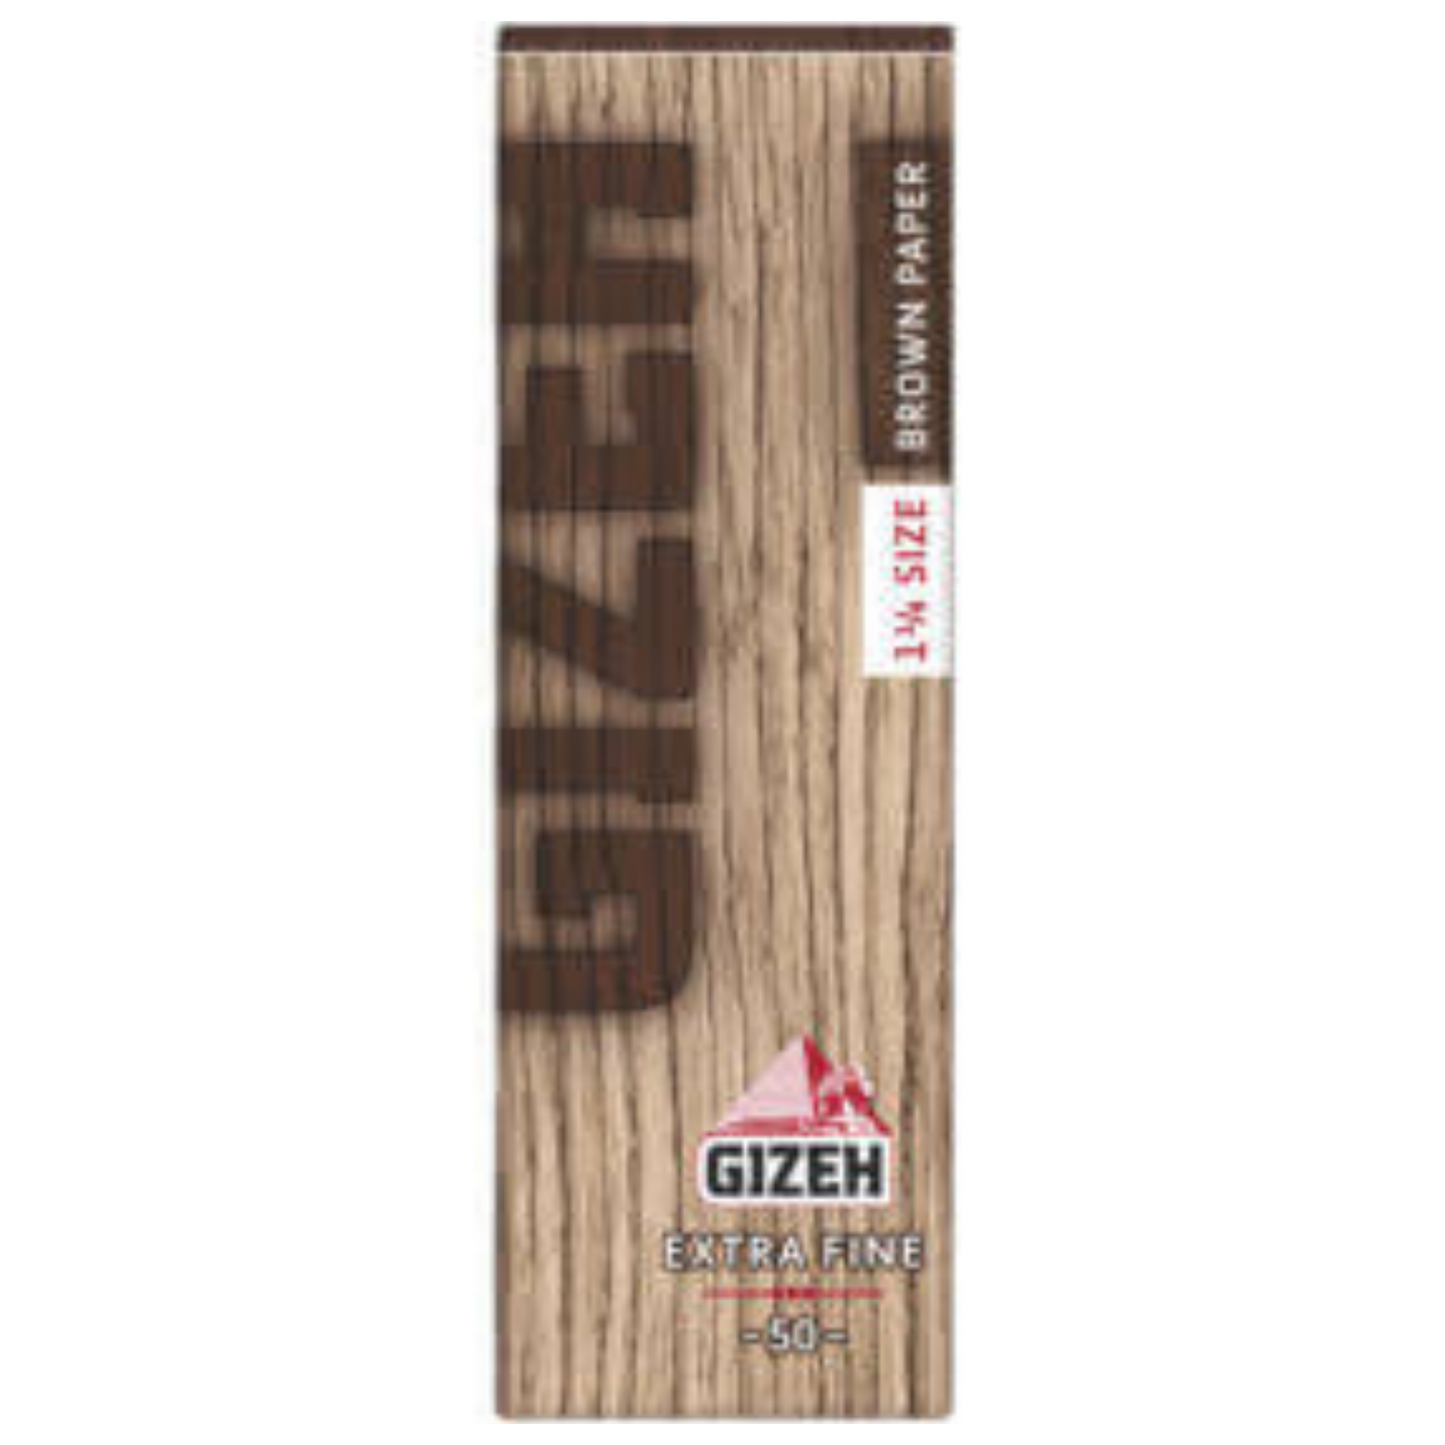 GIZEH Extra Brown Extra Fine